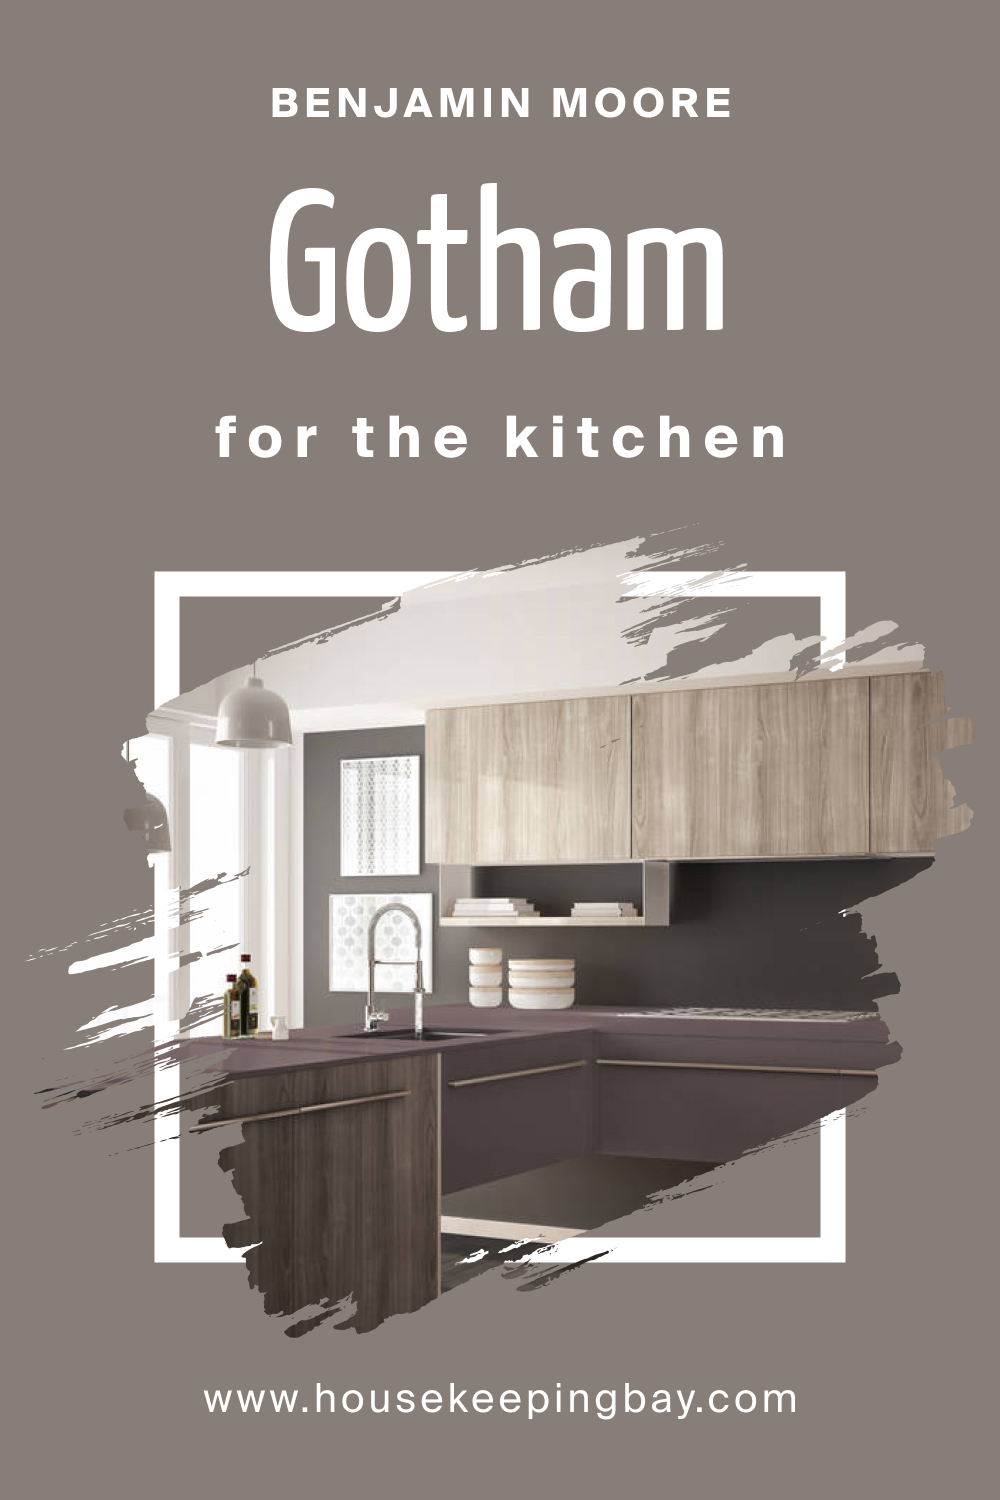 How to Use Gotham CSP-385 in the Kitchen?